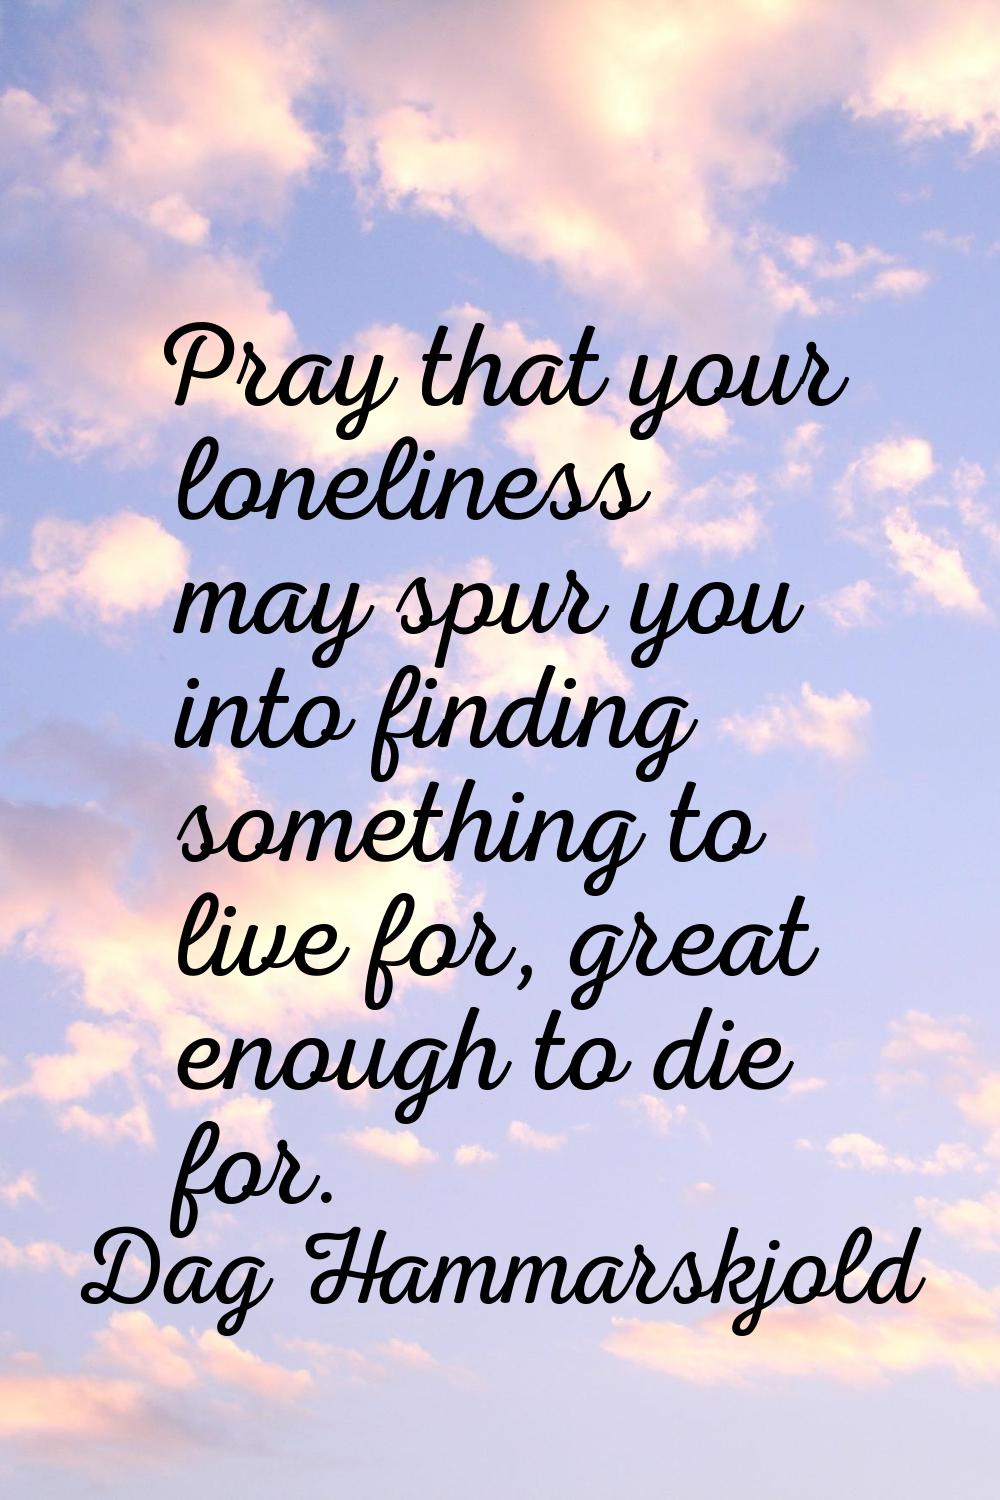 Pray that your loneliness may spur you into finding something to live for, great enough to die for.